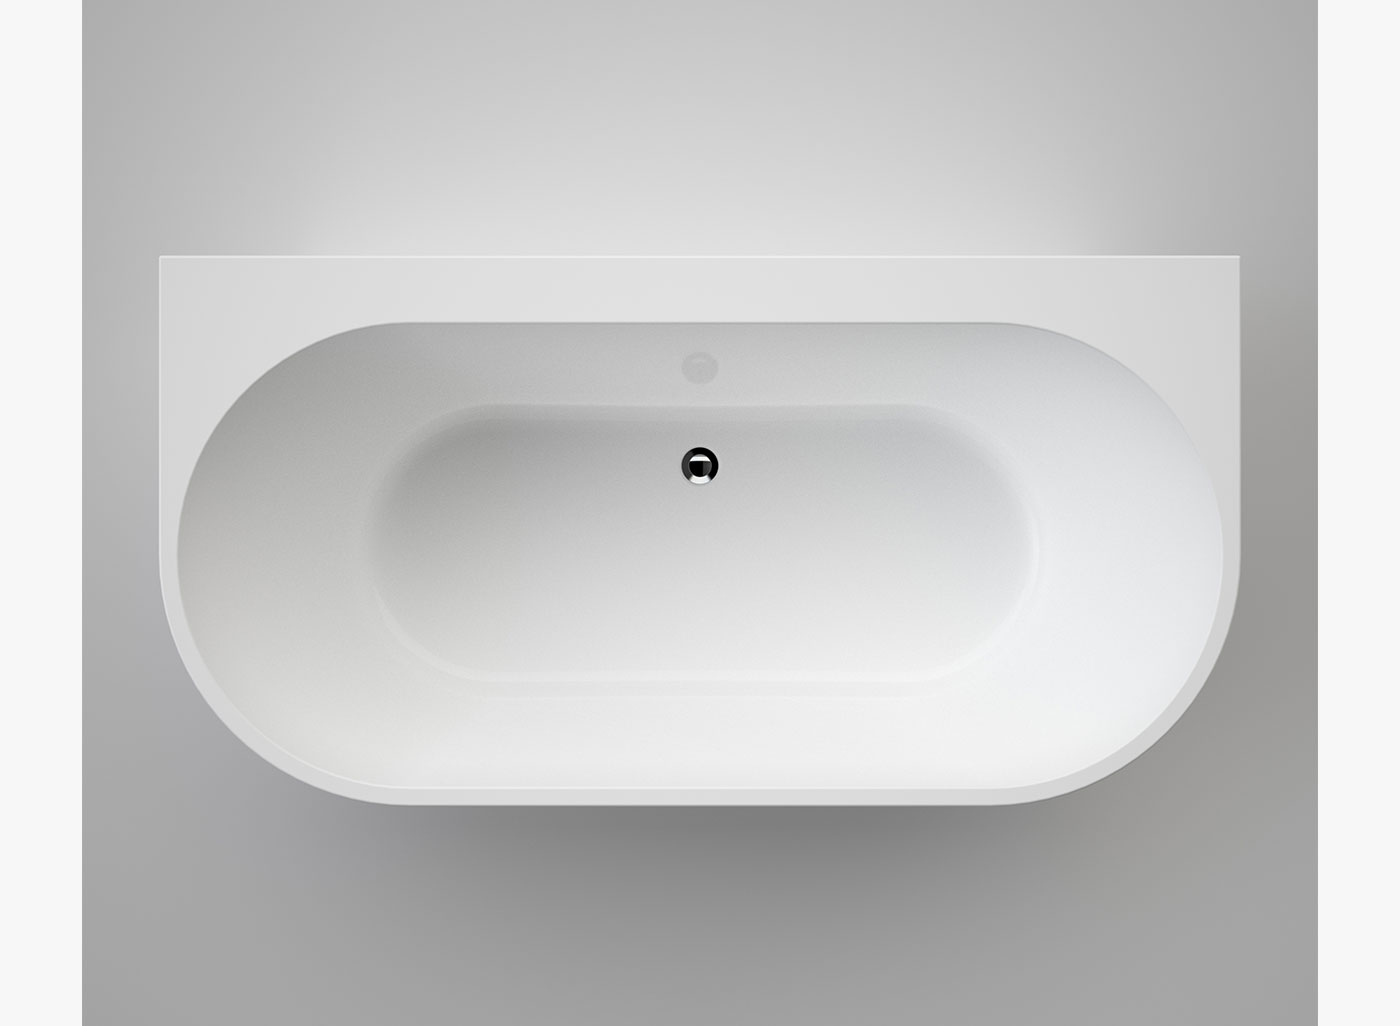 is perfect for bathrooms limited in space. A seamless design with minimalist styling